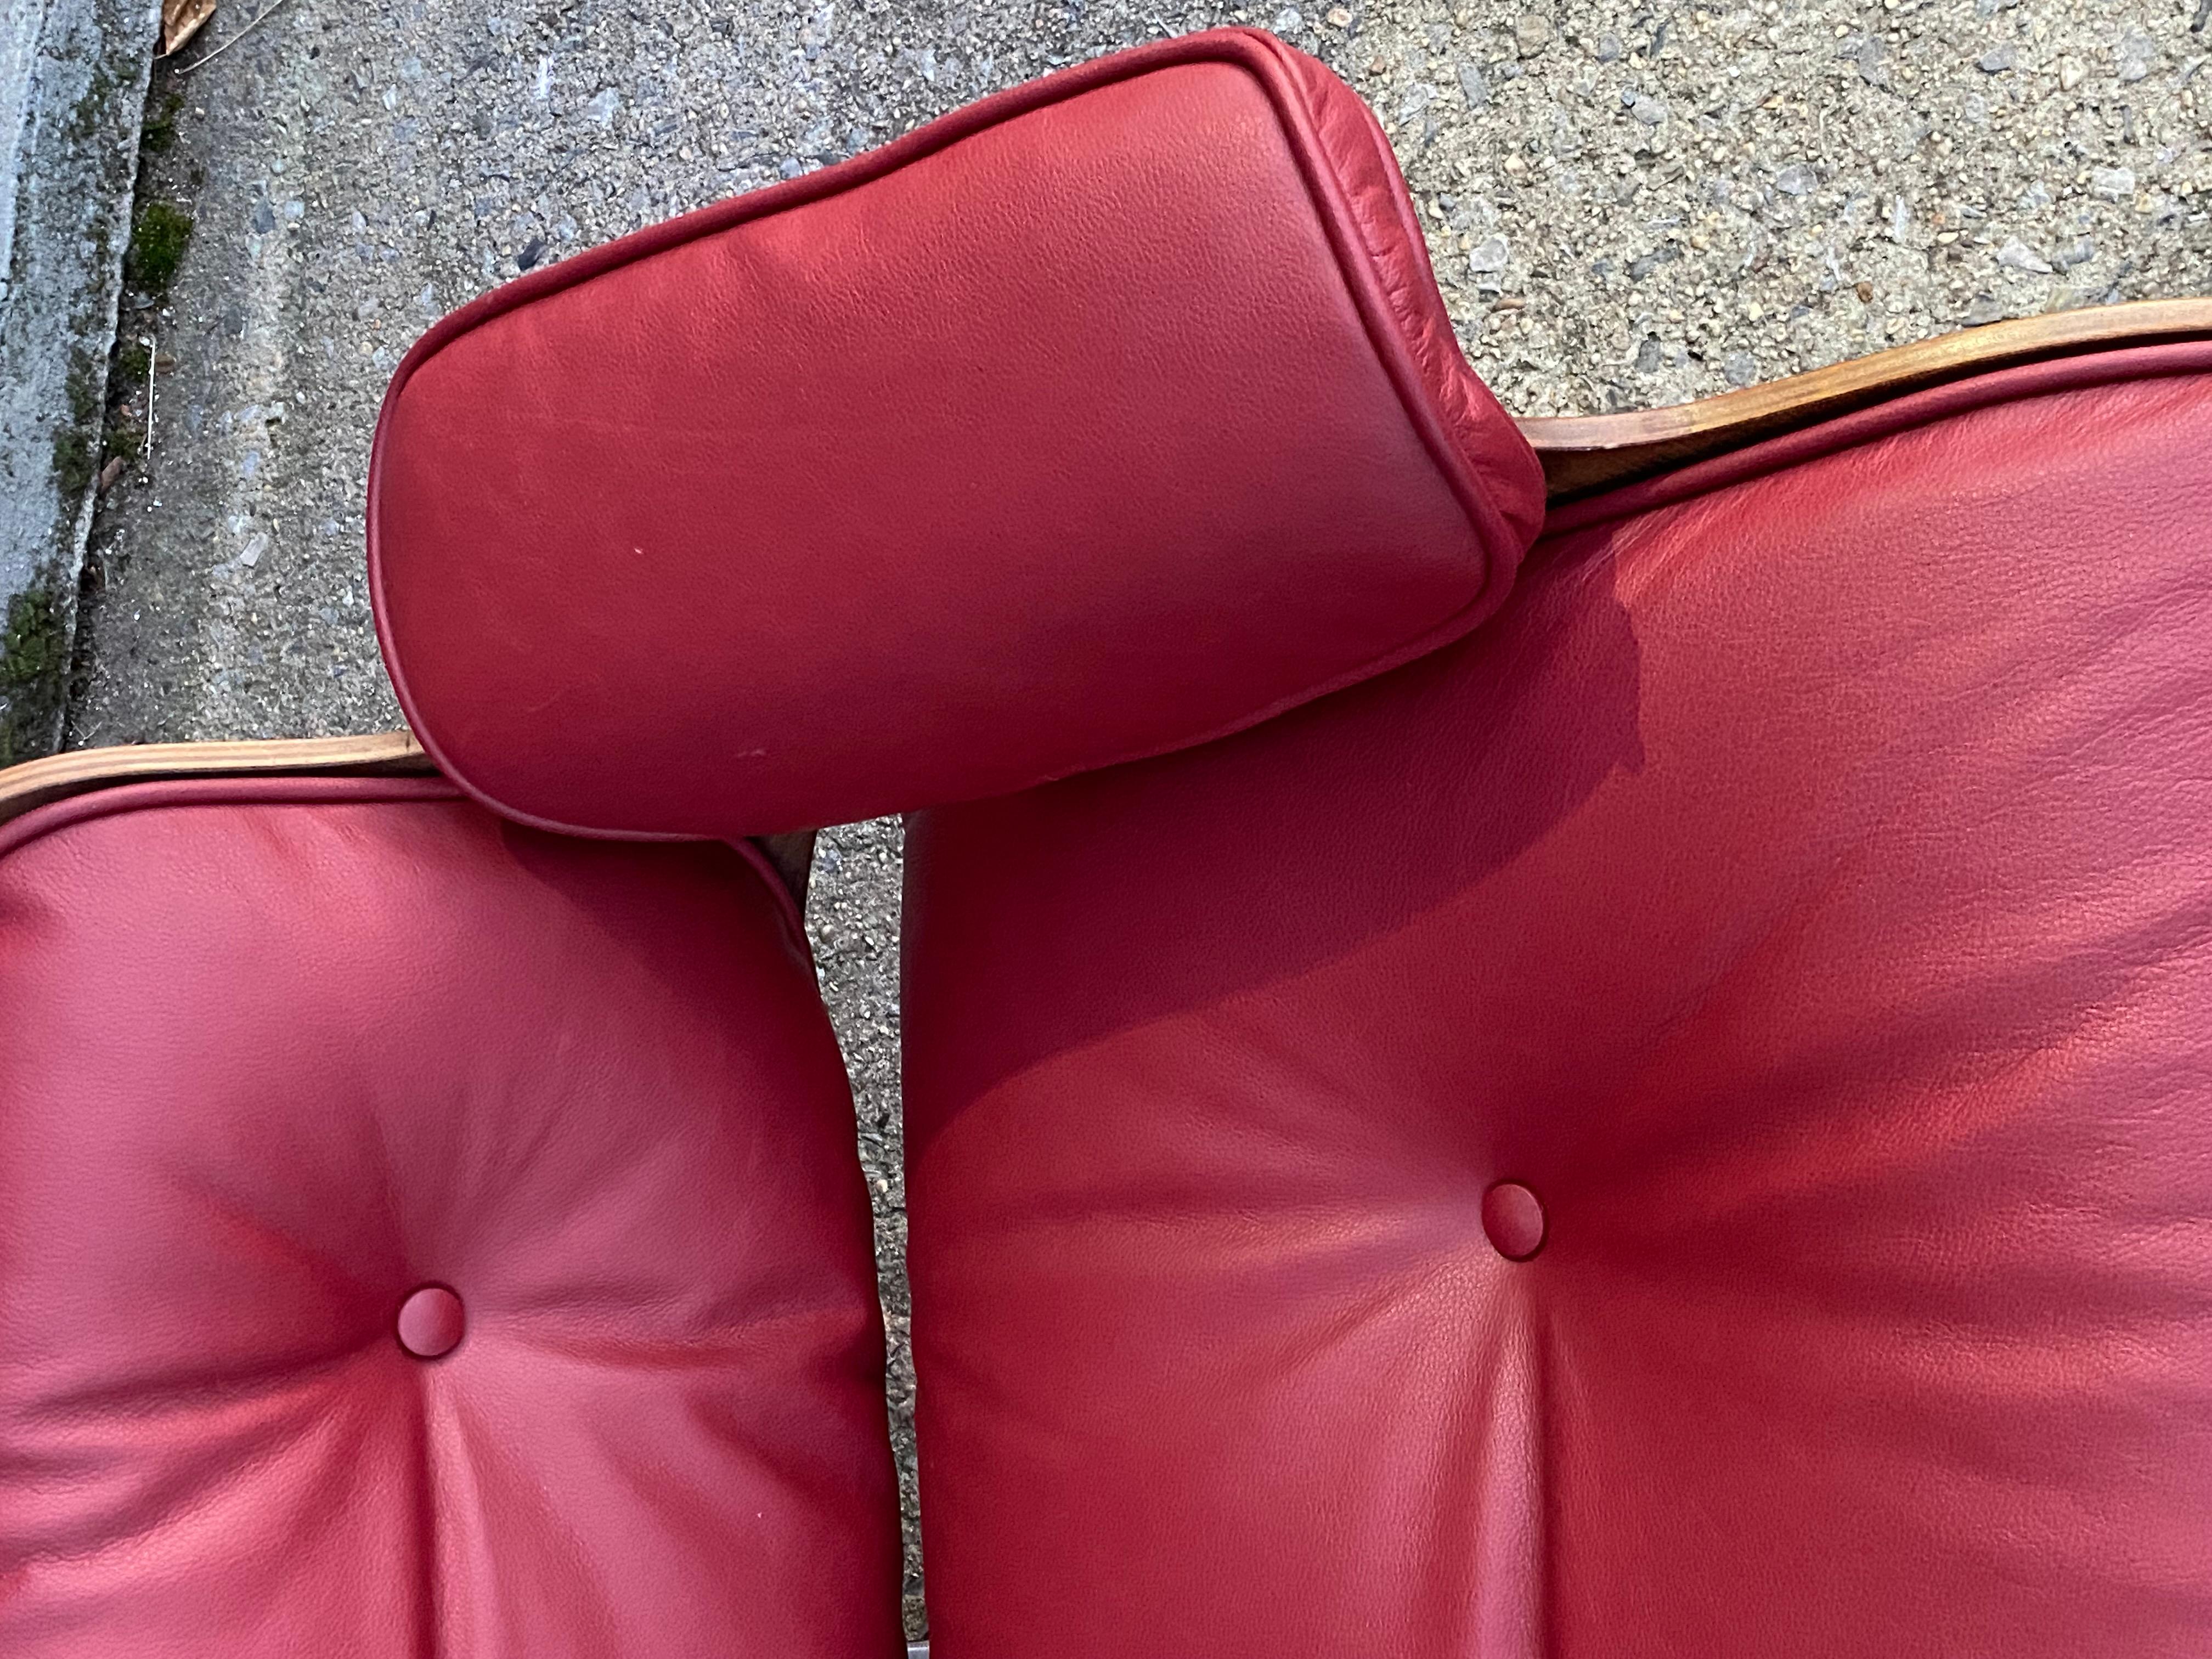 Restored Eames Lounge with New Leather in Chianti In Good Condition For Sale In Brooklyn, NY